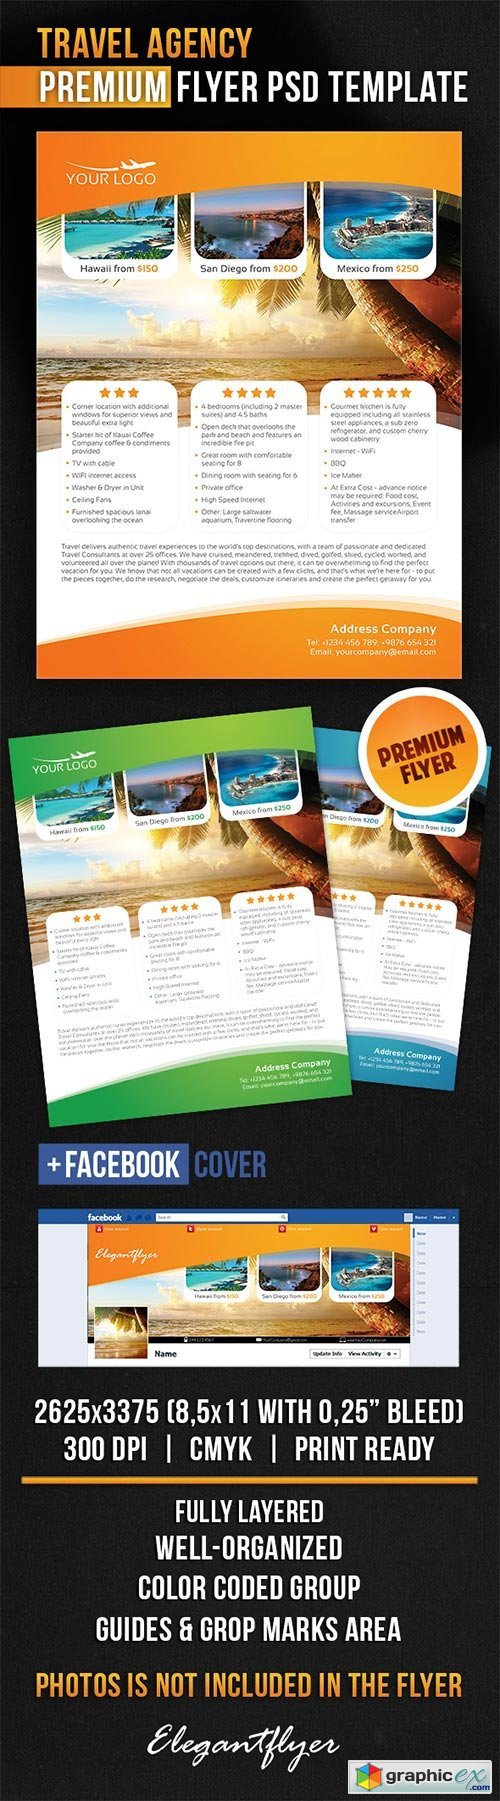 Travel Agency Flyer PSD Template + Facebook Cover